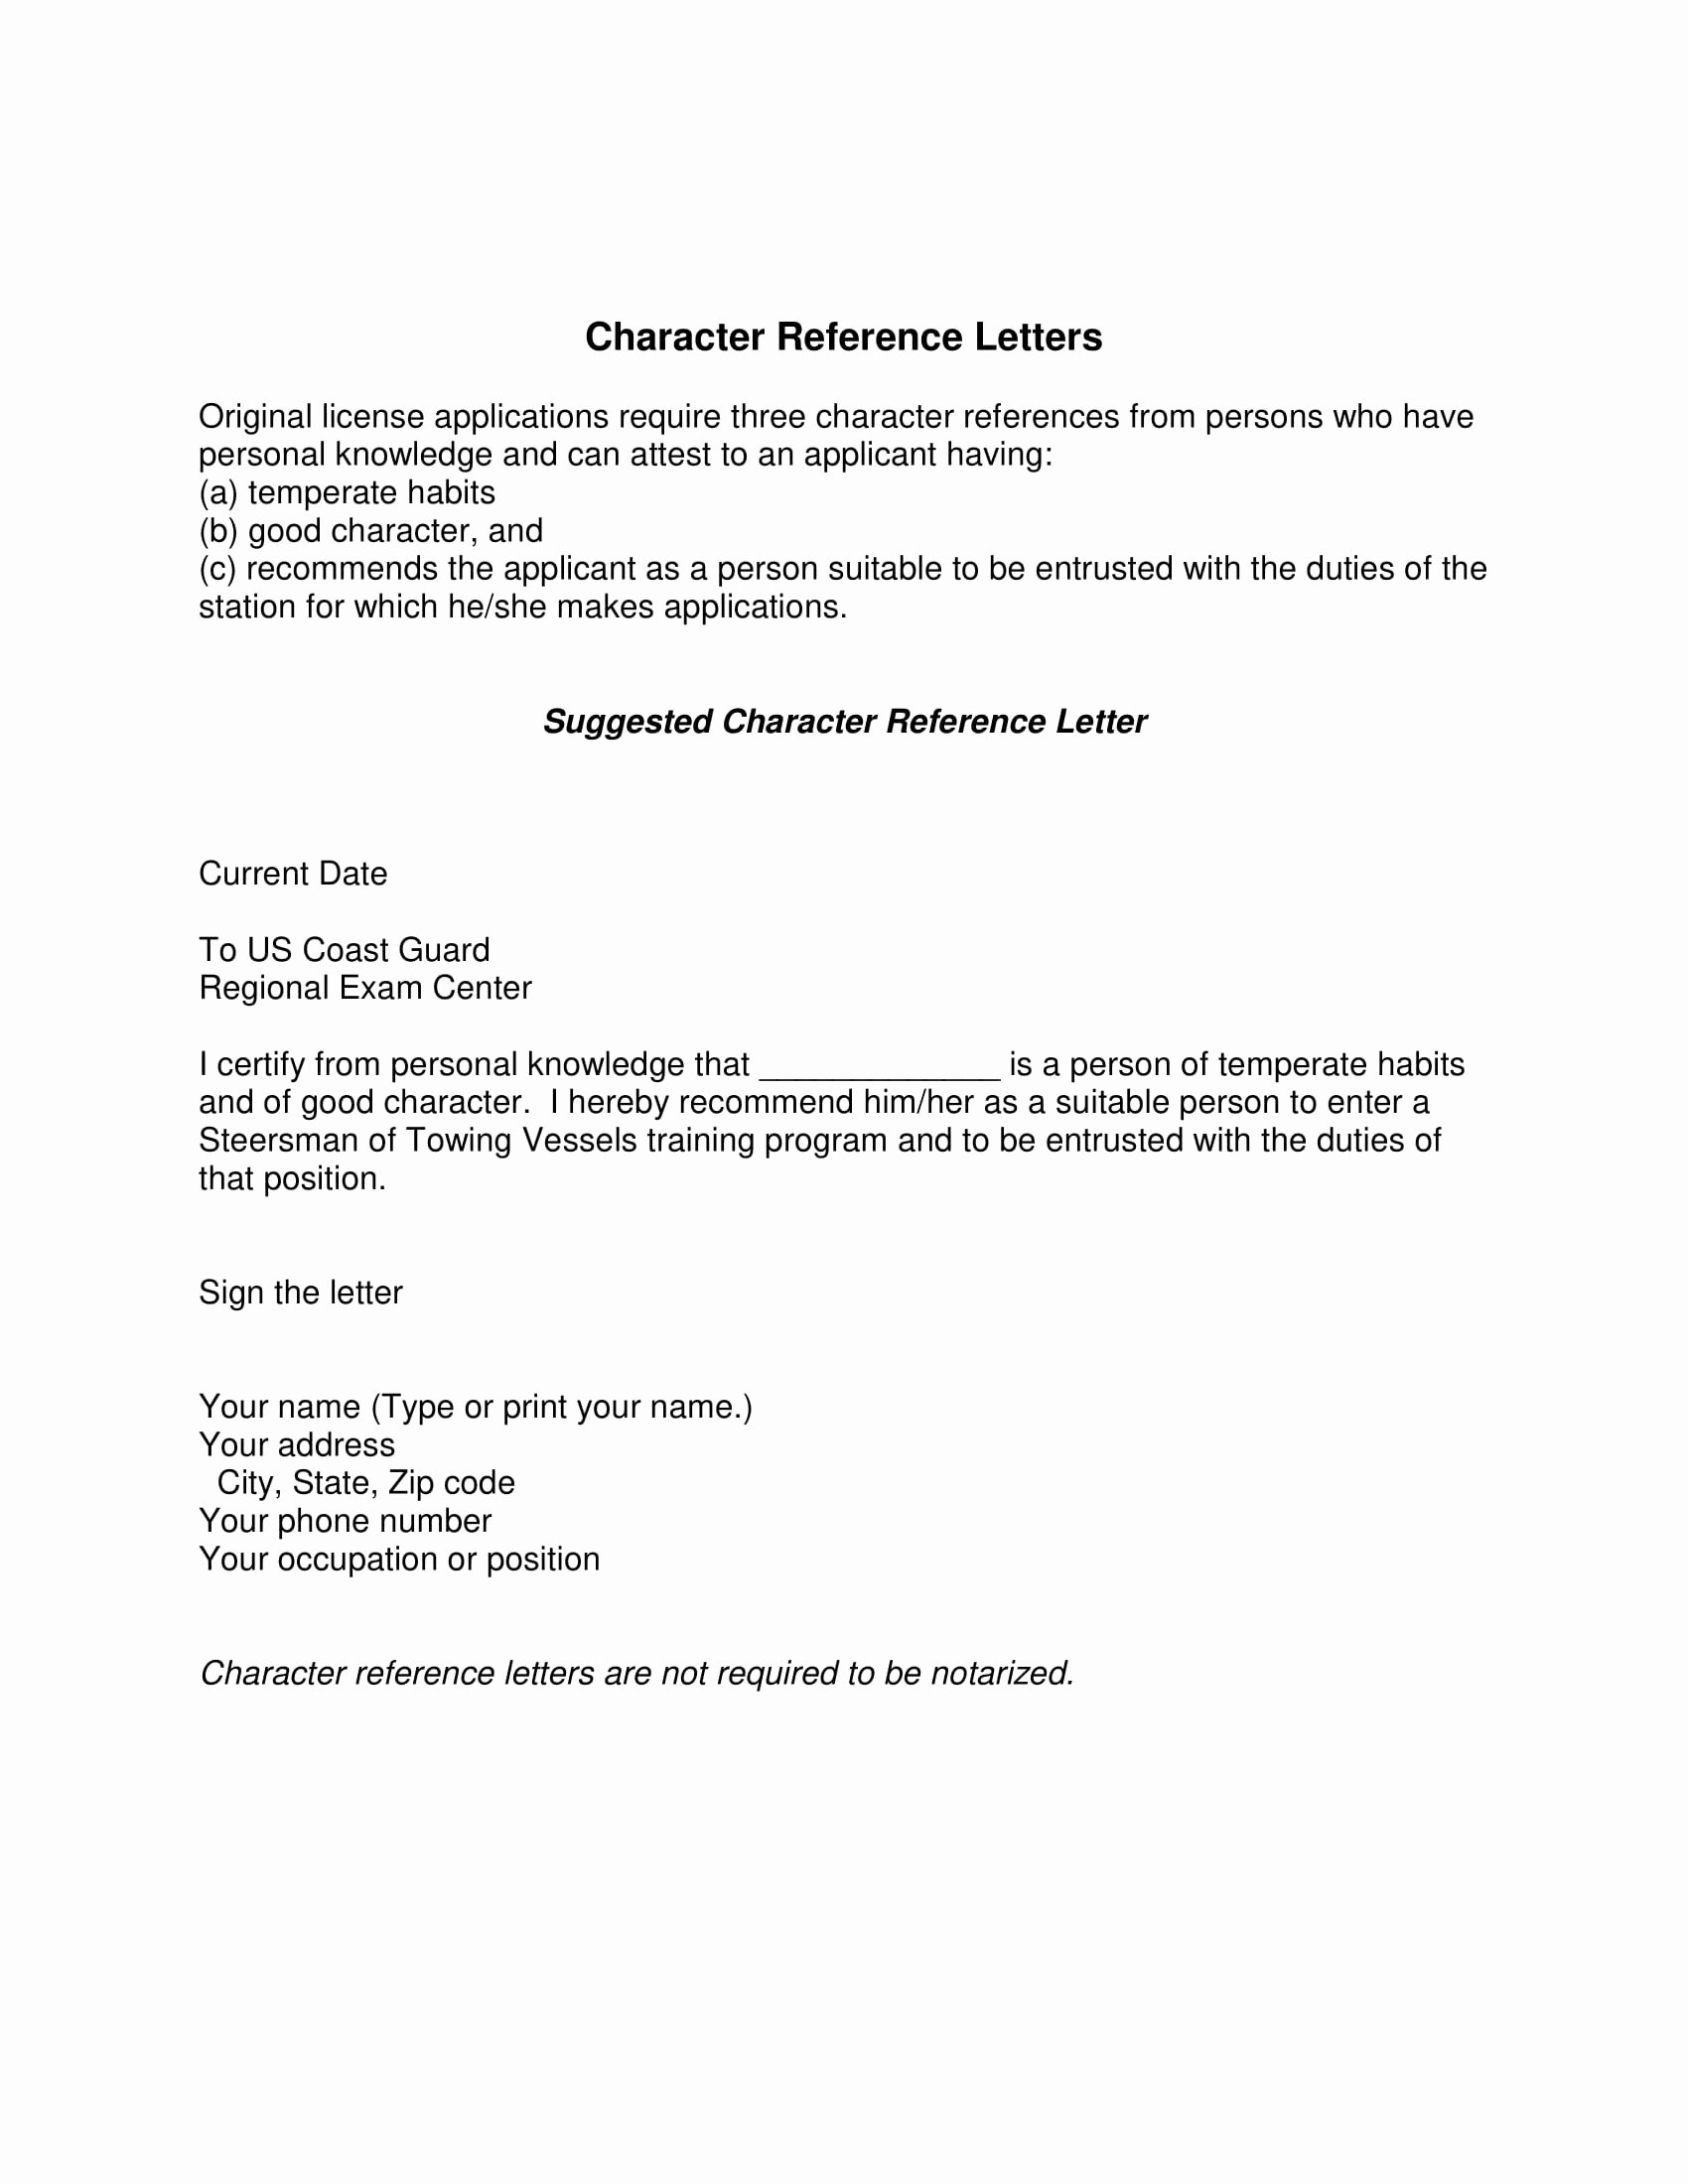 Samples Of Reference Letters Fresh 8 Character Reference Letter Examples Pdf